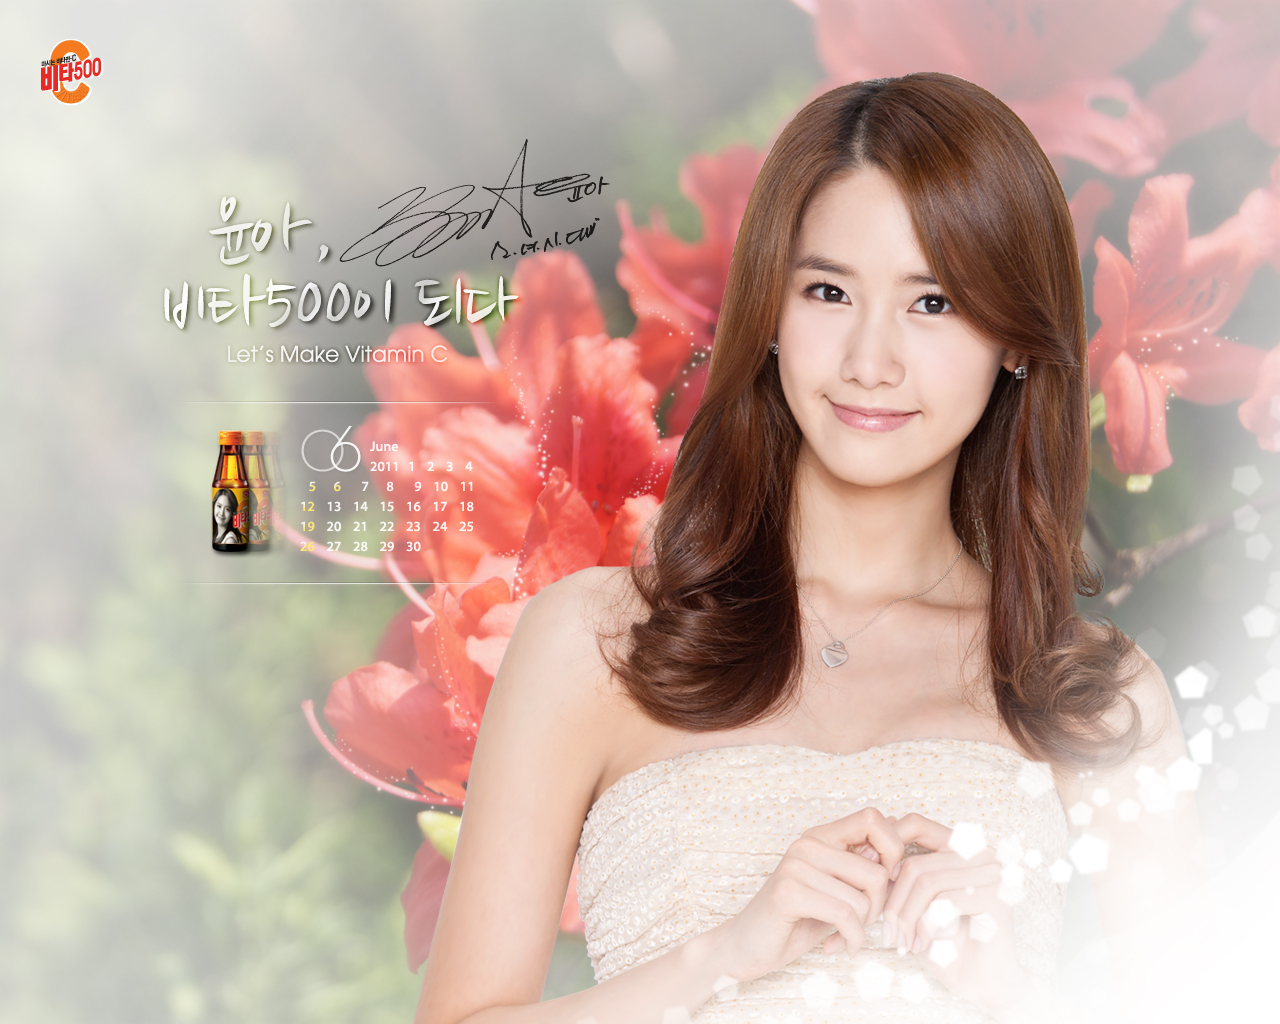 yoona SNSD cute and sexy..!!! ^_^